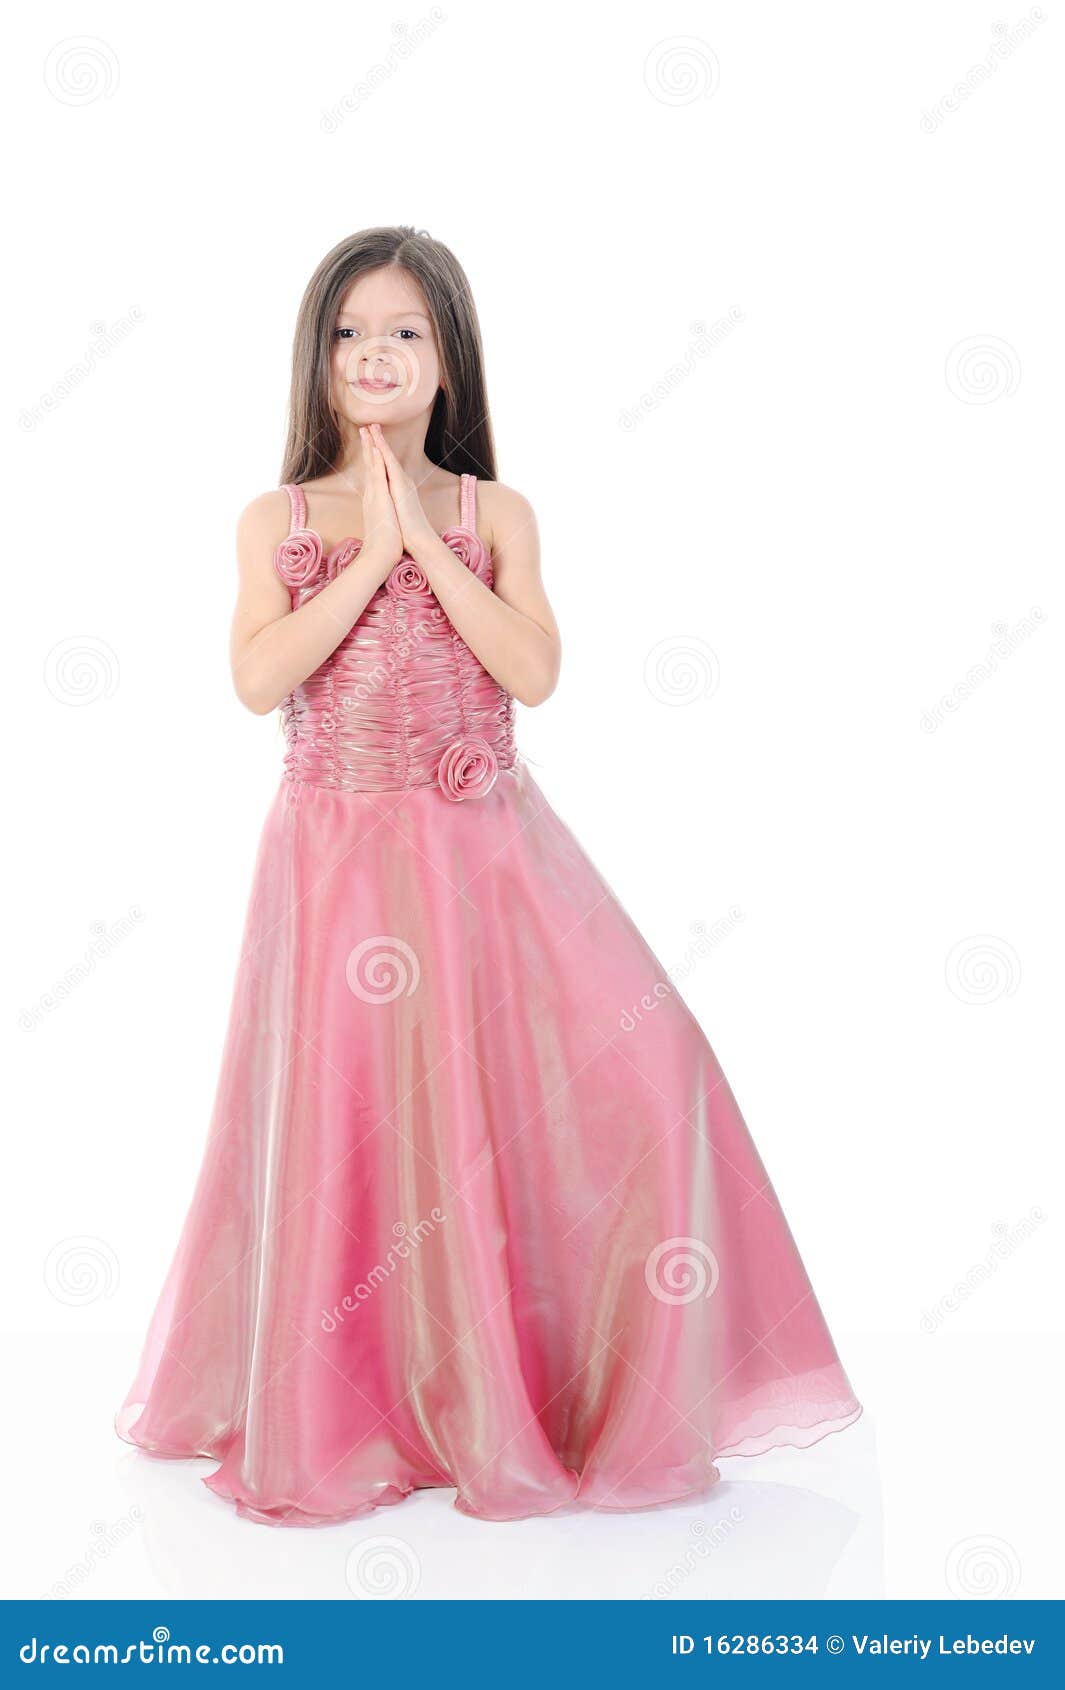 More similar stock images of ` Little girl in evening dress `